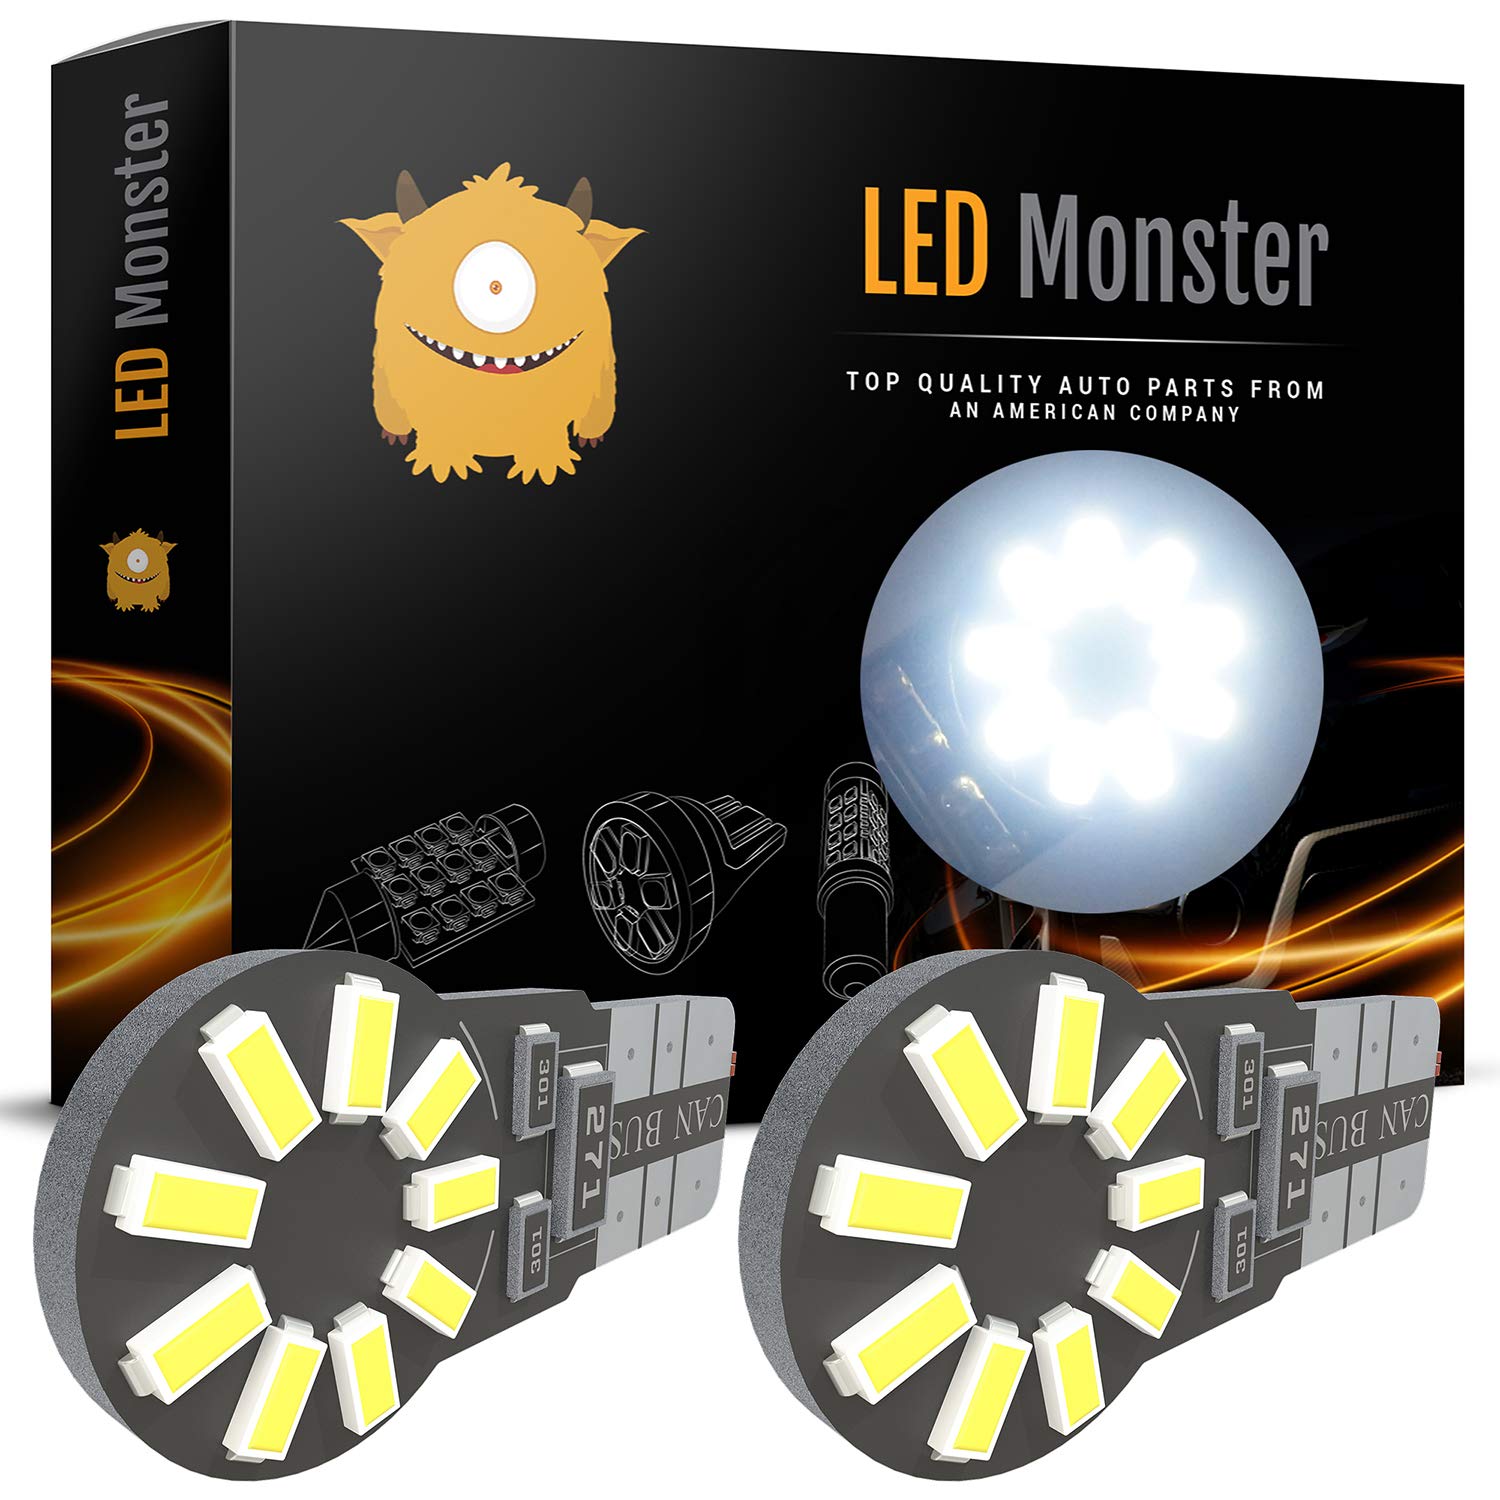 Book Cover LED Monster 194 Led Bulb 6000K White - Best For License Plate Light & Dome Light Position - T10 LED Bulbs 12 Volt - Luces Led Para Autos - Automotive Accessories for Car & Truck - 3 Years Warranty